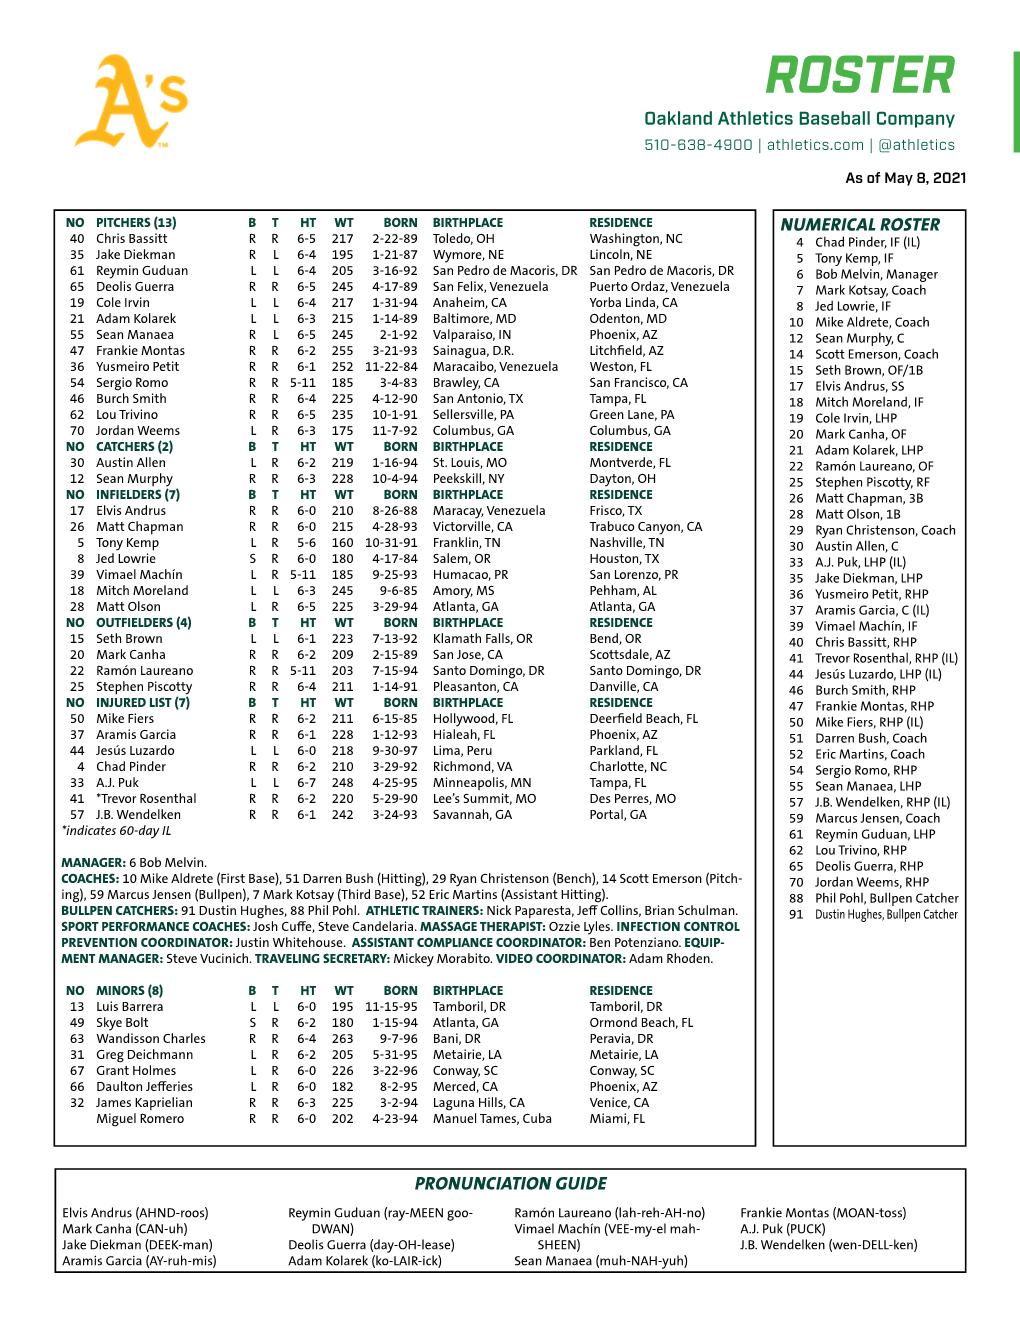 05-08-2021 A's Roster